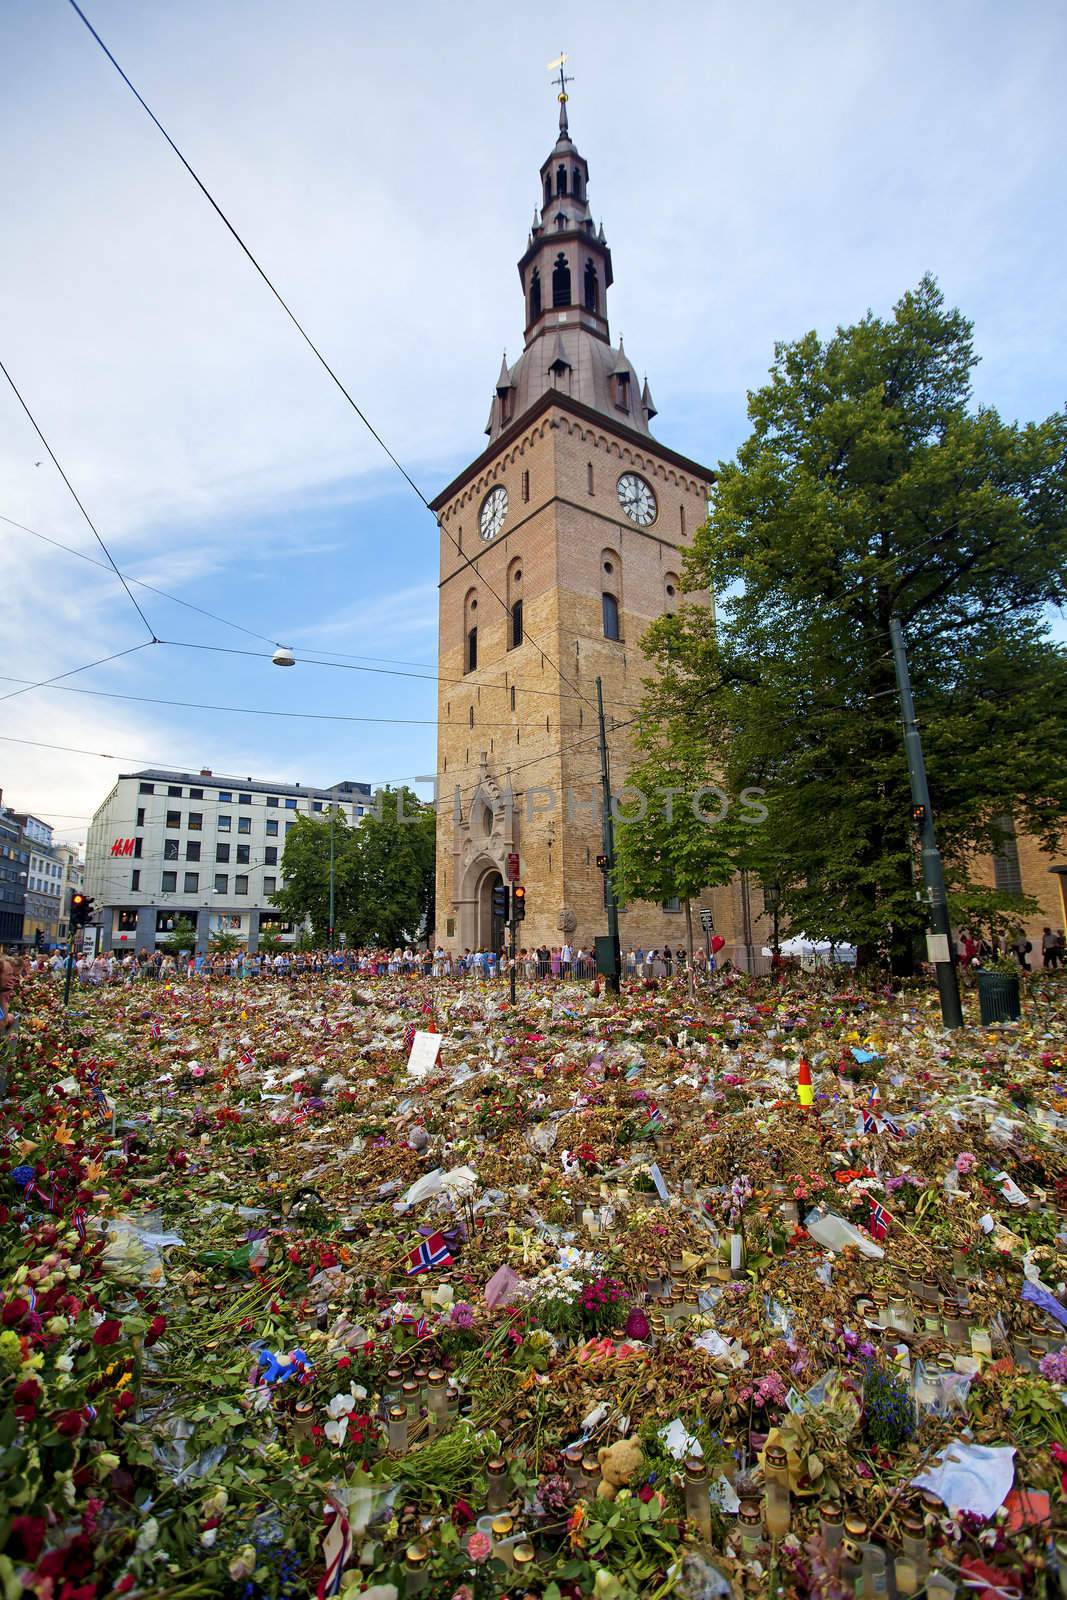 OSLO NORWAY - JULY 31 2011: People lay down flowers, and lights candles outside the cathedral of Oslo to show respect for the victims of the bombing and shooting that took place July 22 2011, July 31, 2011, Oslo